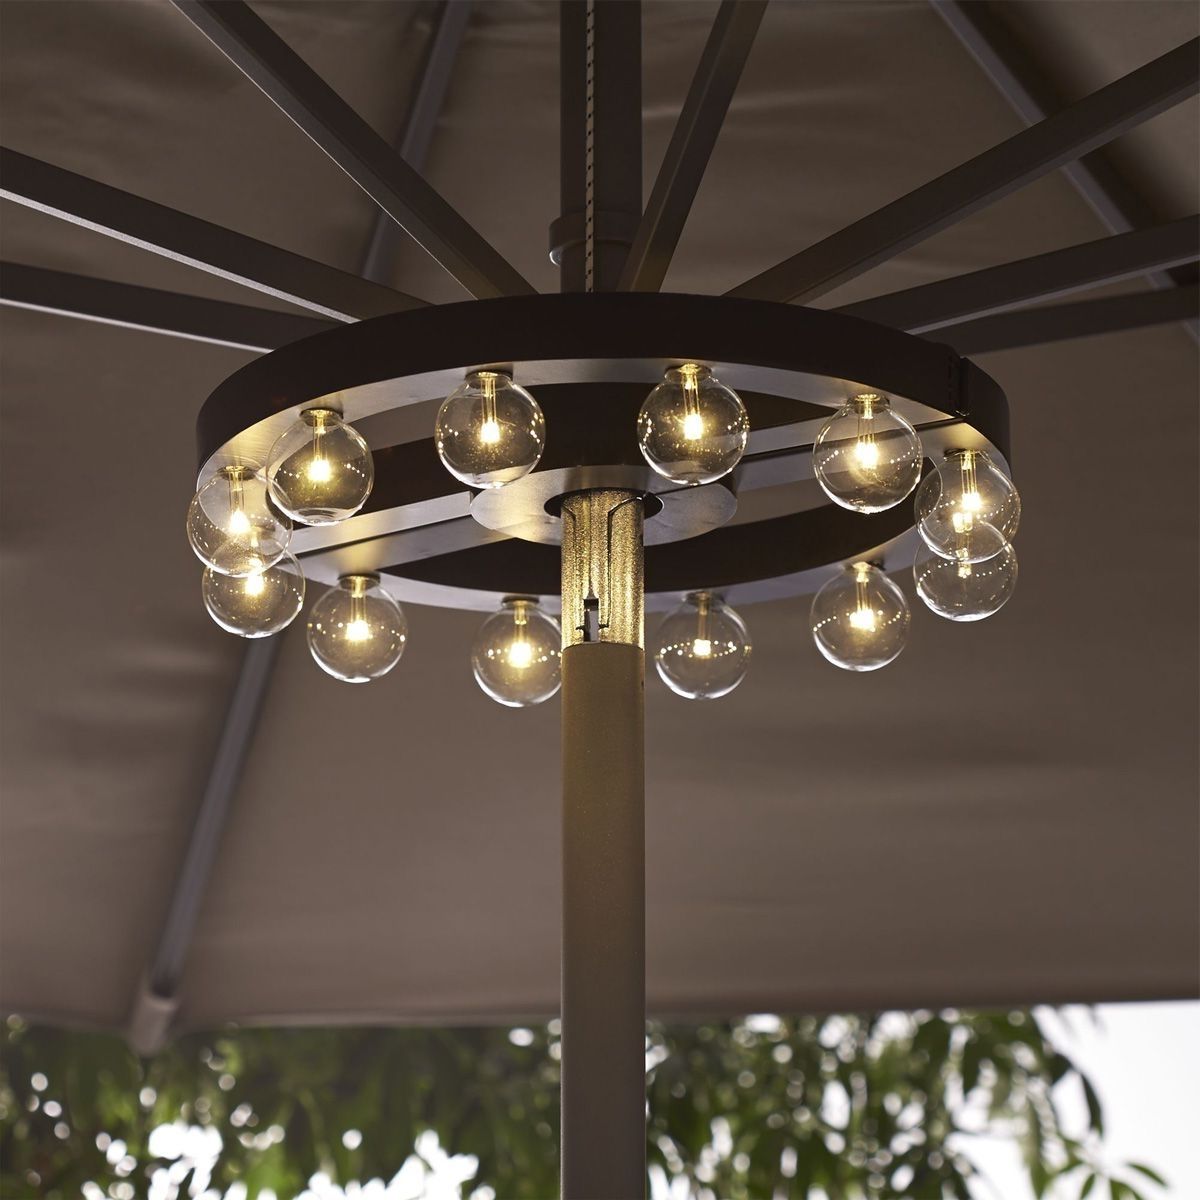 Solar Lights For Patio Umbrellas Throughout Well Known Solar Lights For Patio Umbrellas • Patio Ideas (View 1 of 20)